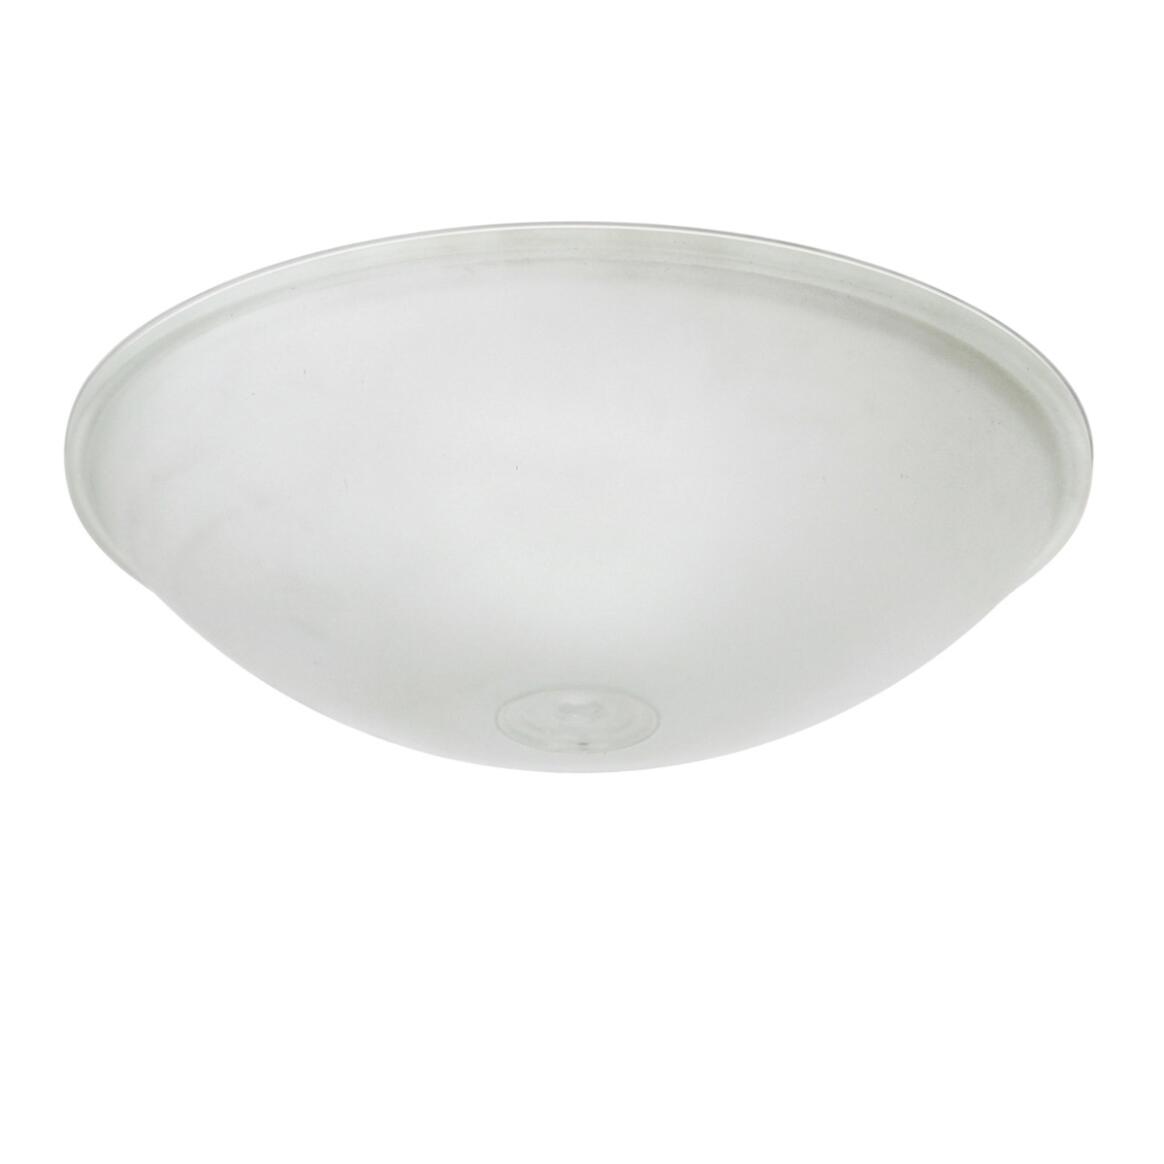 Flush dish ceiling fitting glass lamp shade main product image